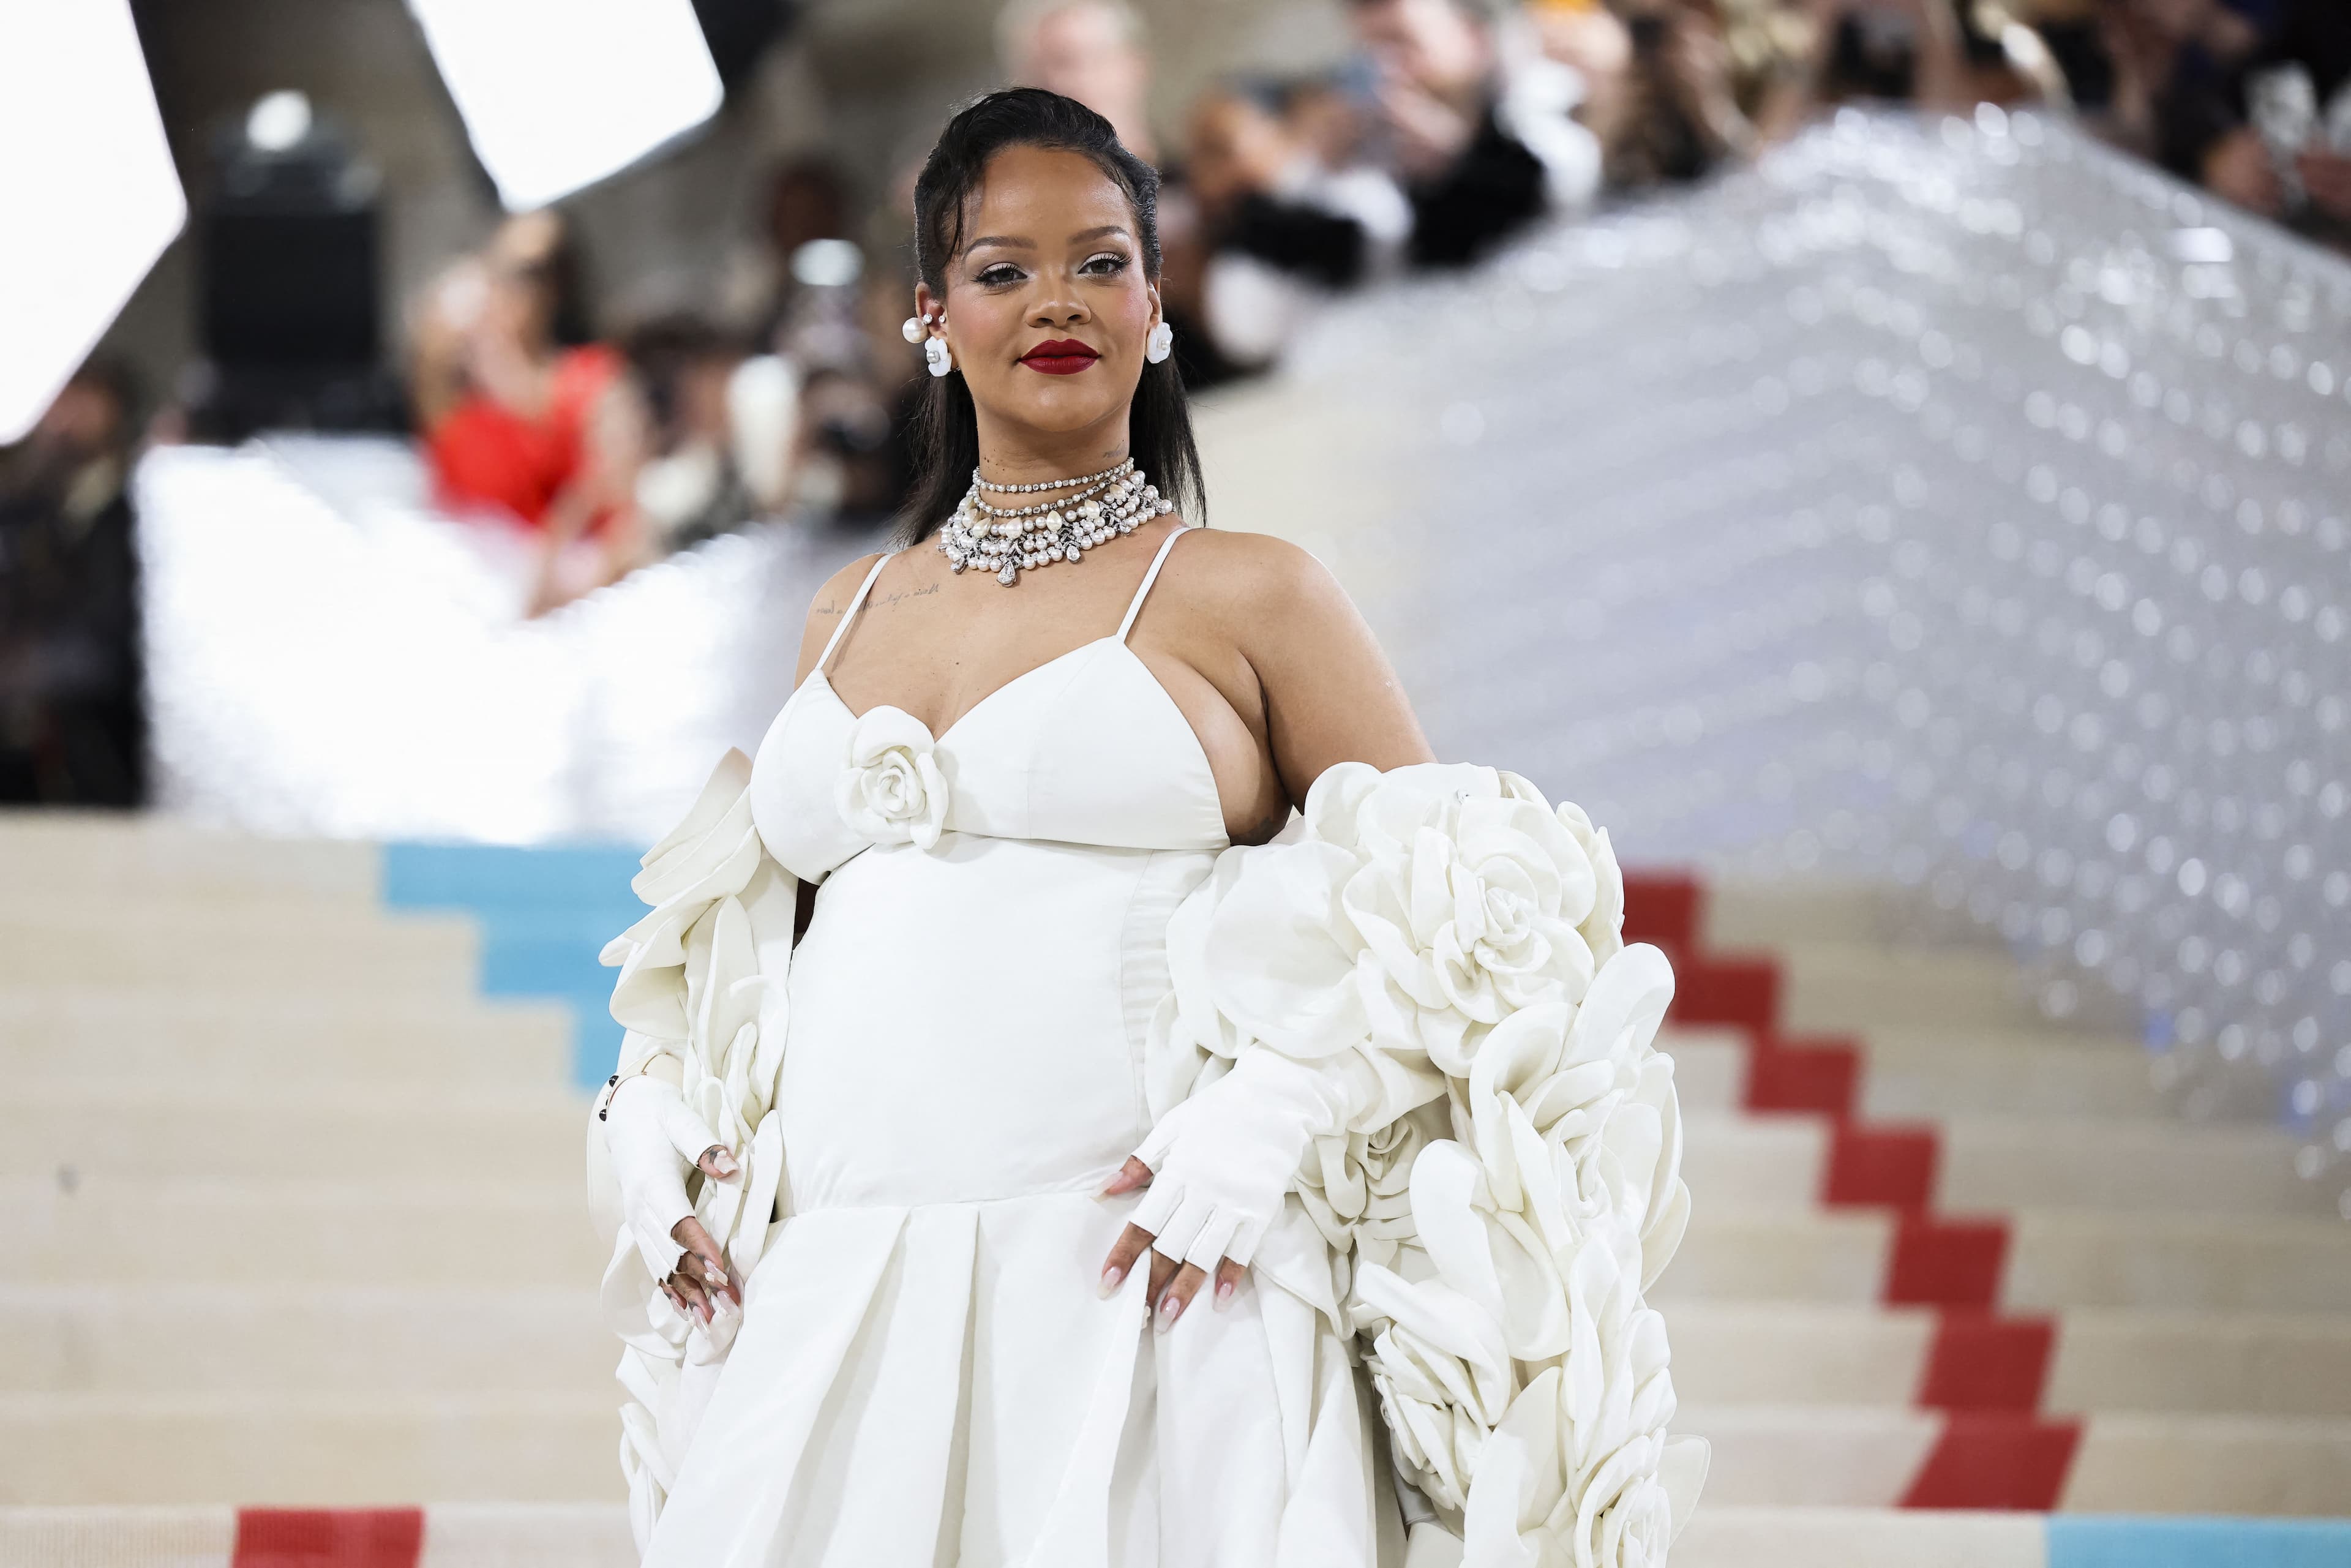 Rihanna removed her hoodie to show off her entire gown at the Met Gala. (REUTERS)